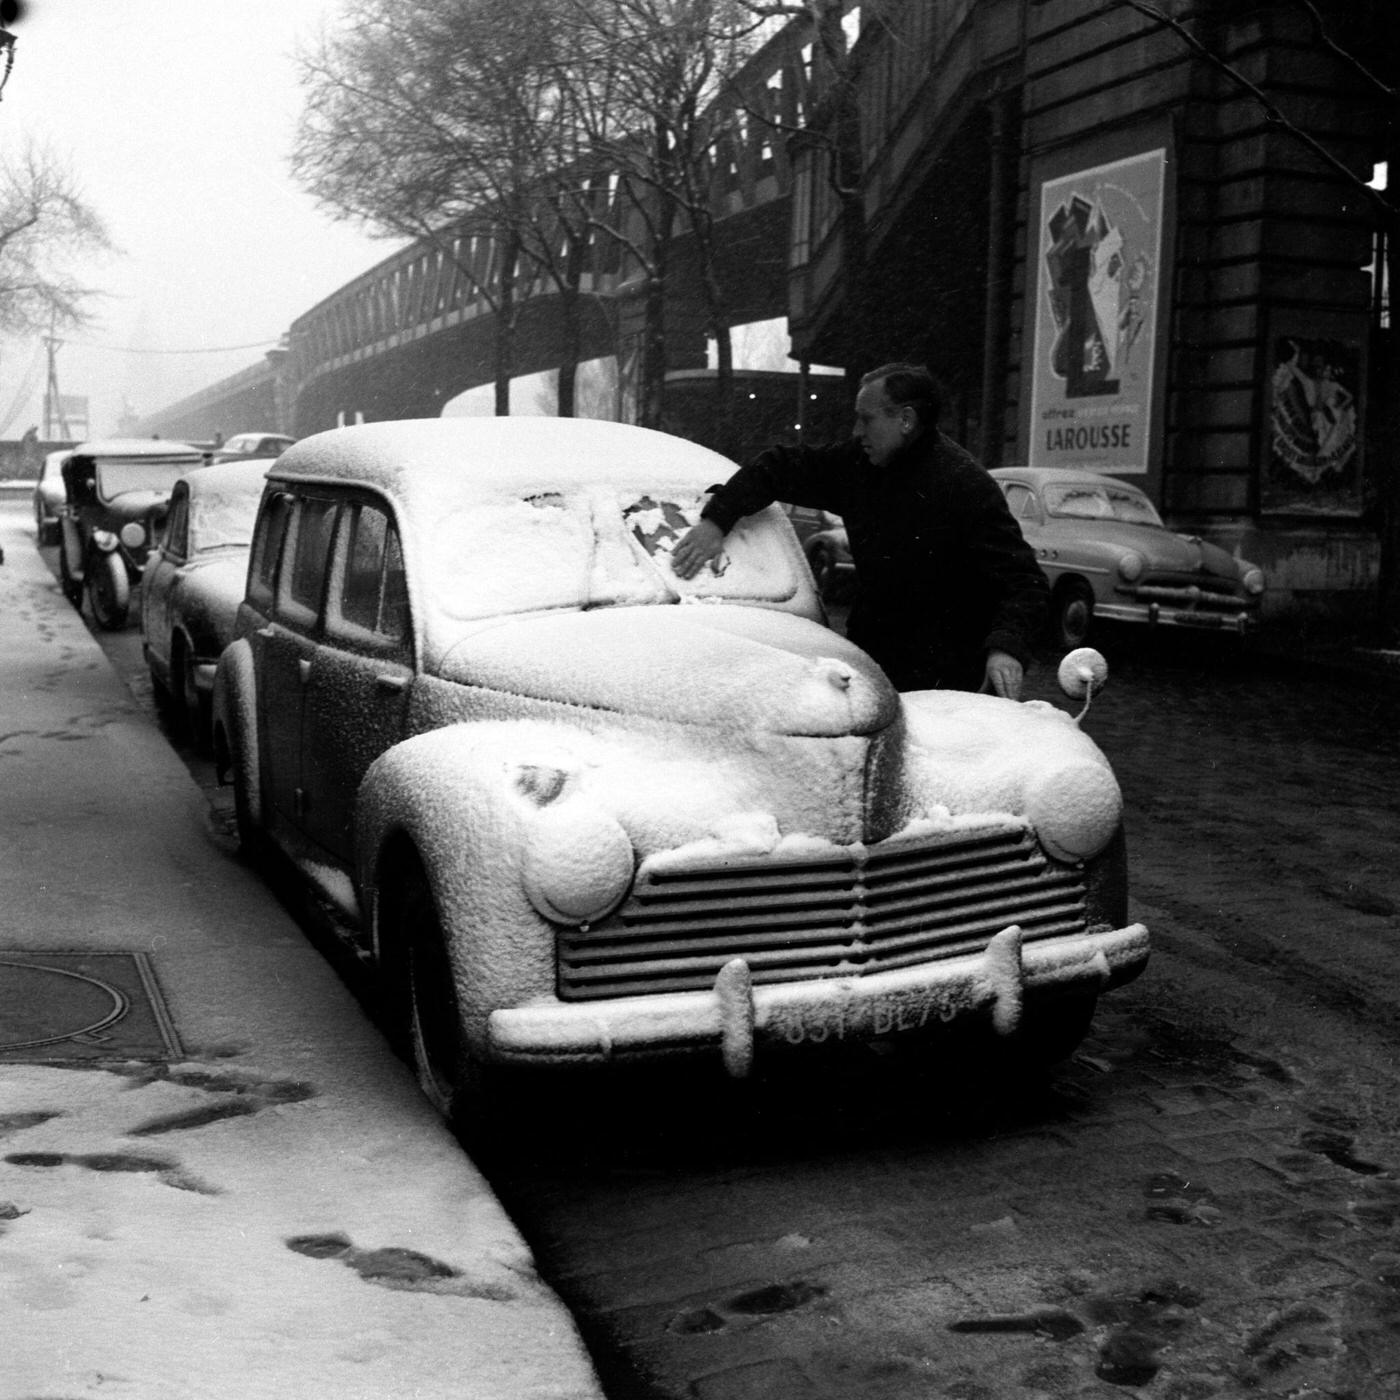 Car Covered In Snow, Paris, January 13, 1955.